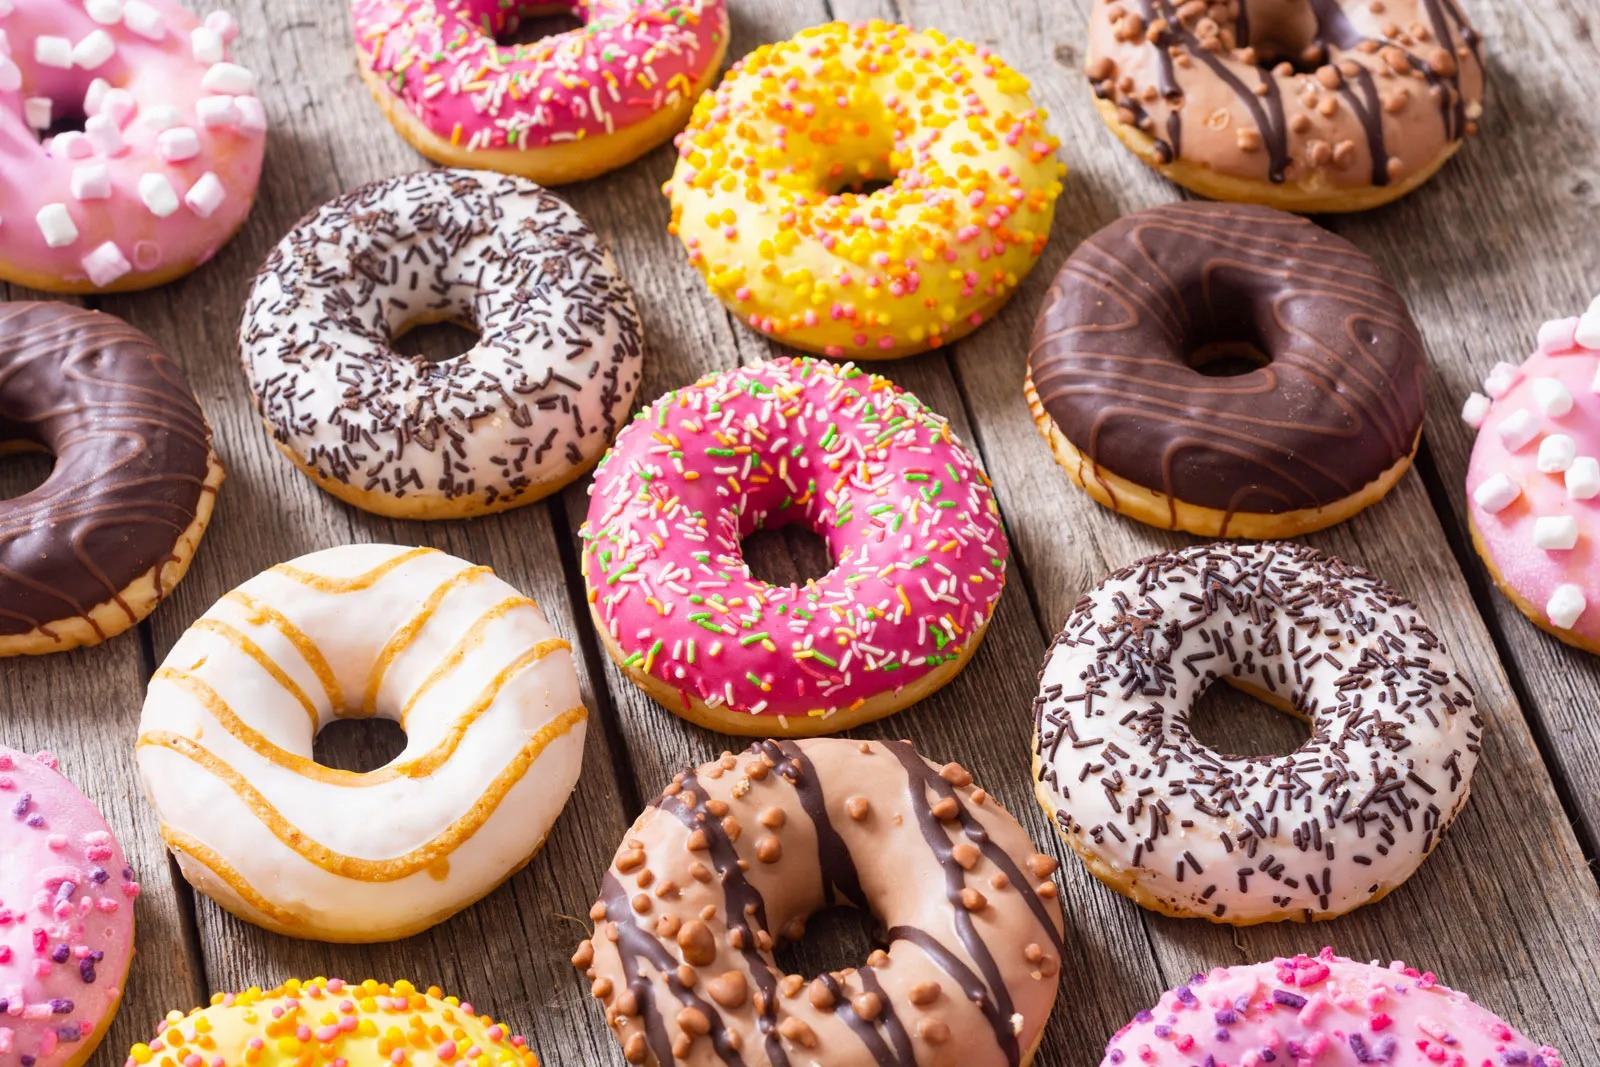 15-nutrition-facts-for-donuts